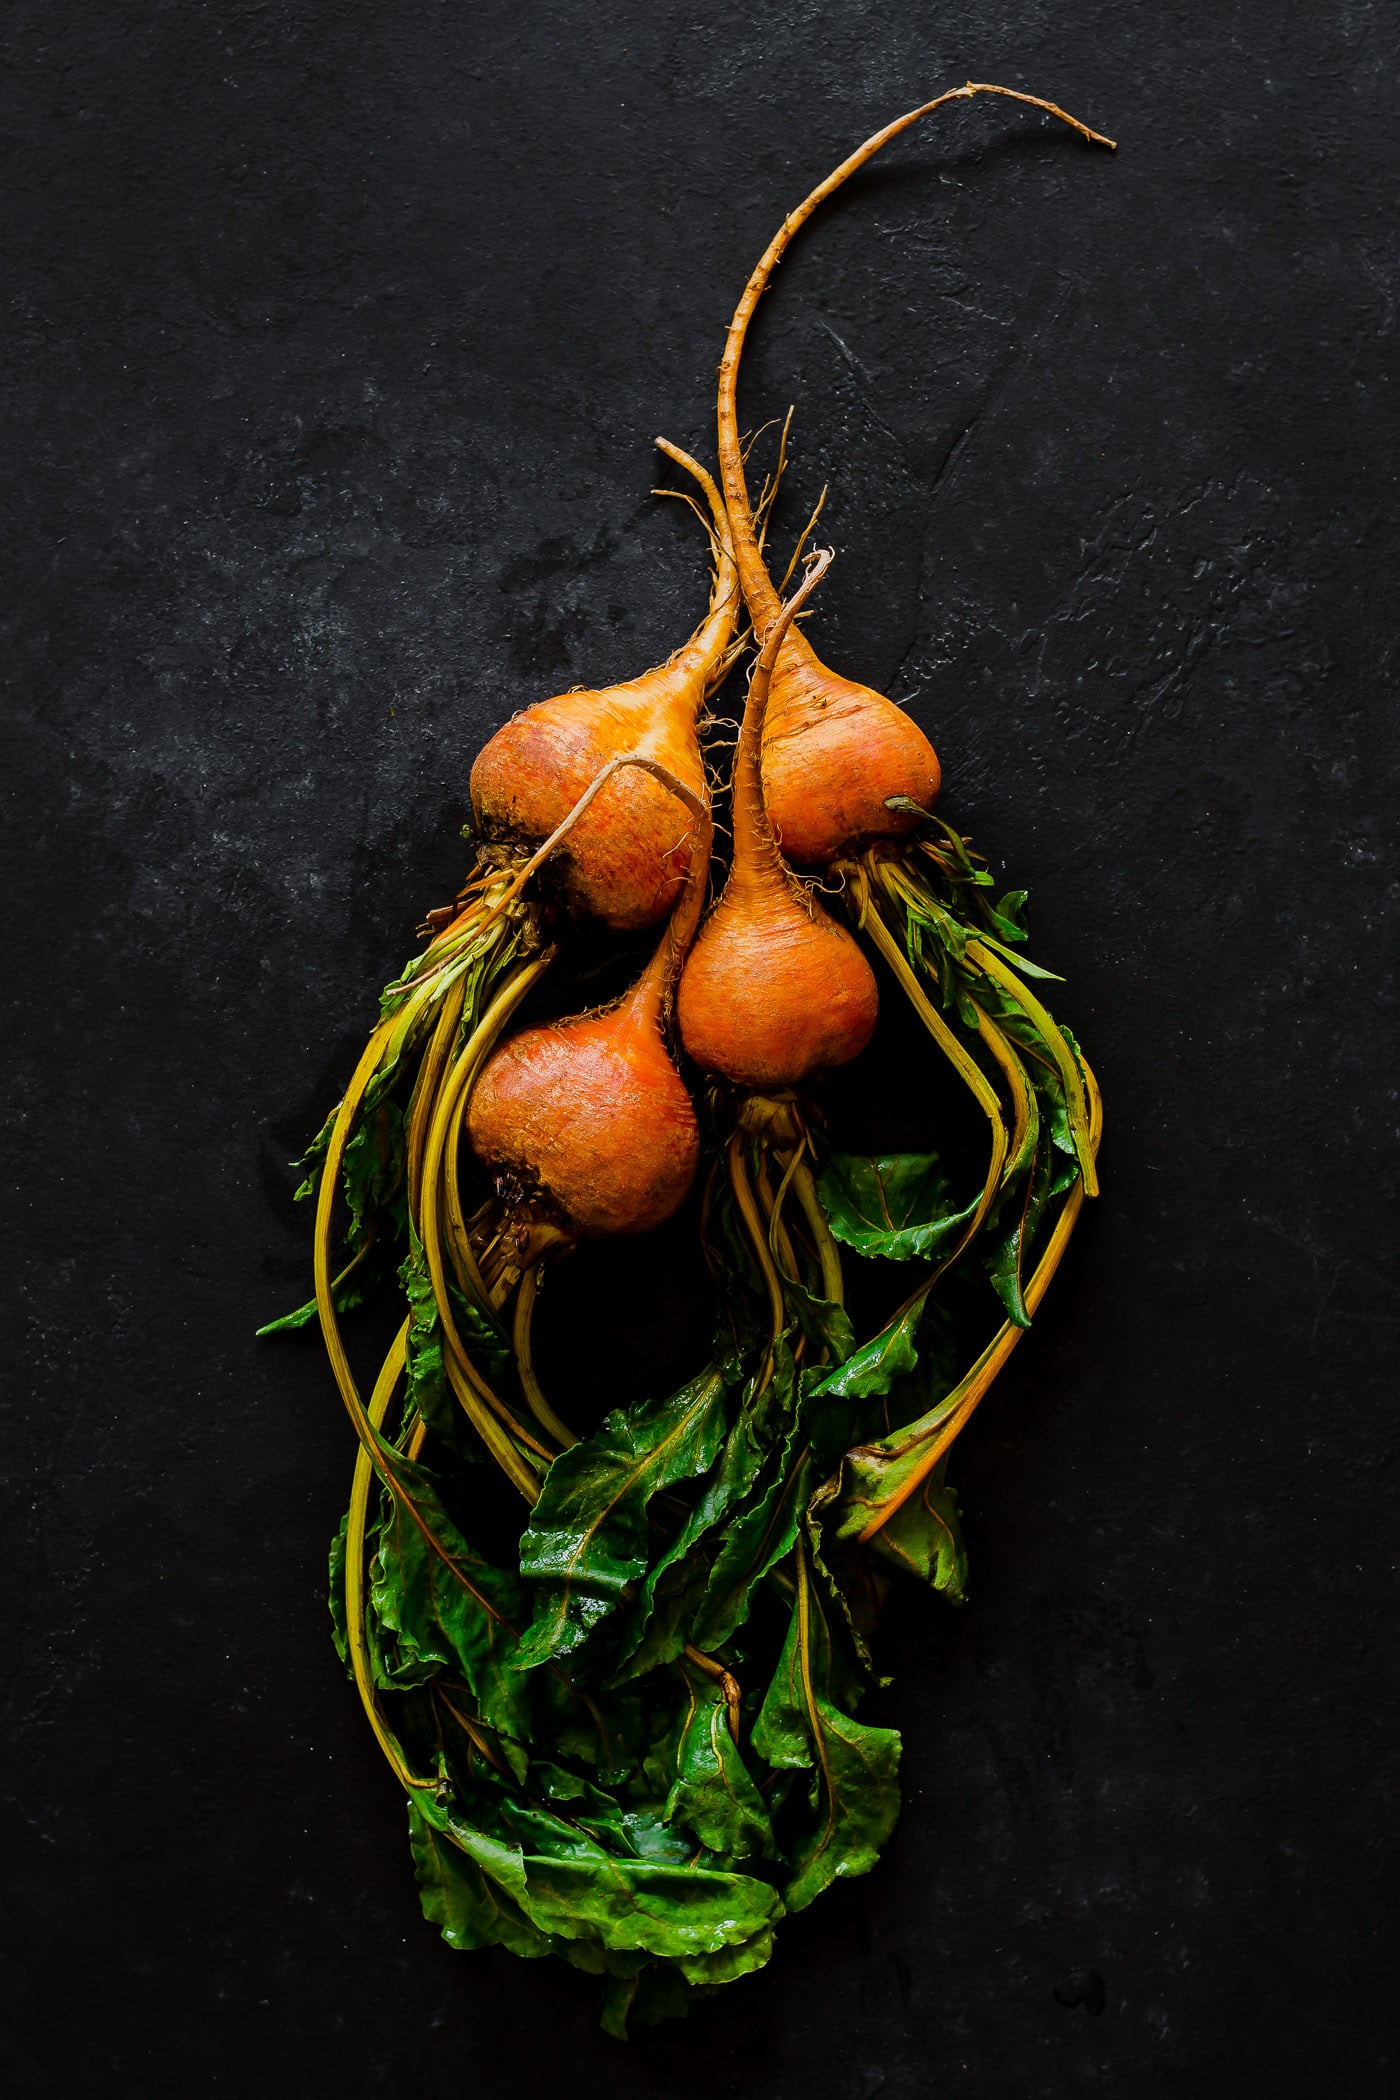 Golden Beets with greens attached on a black surface